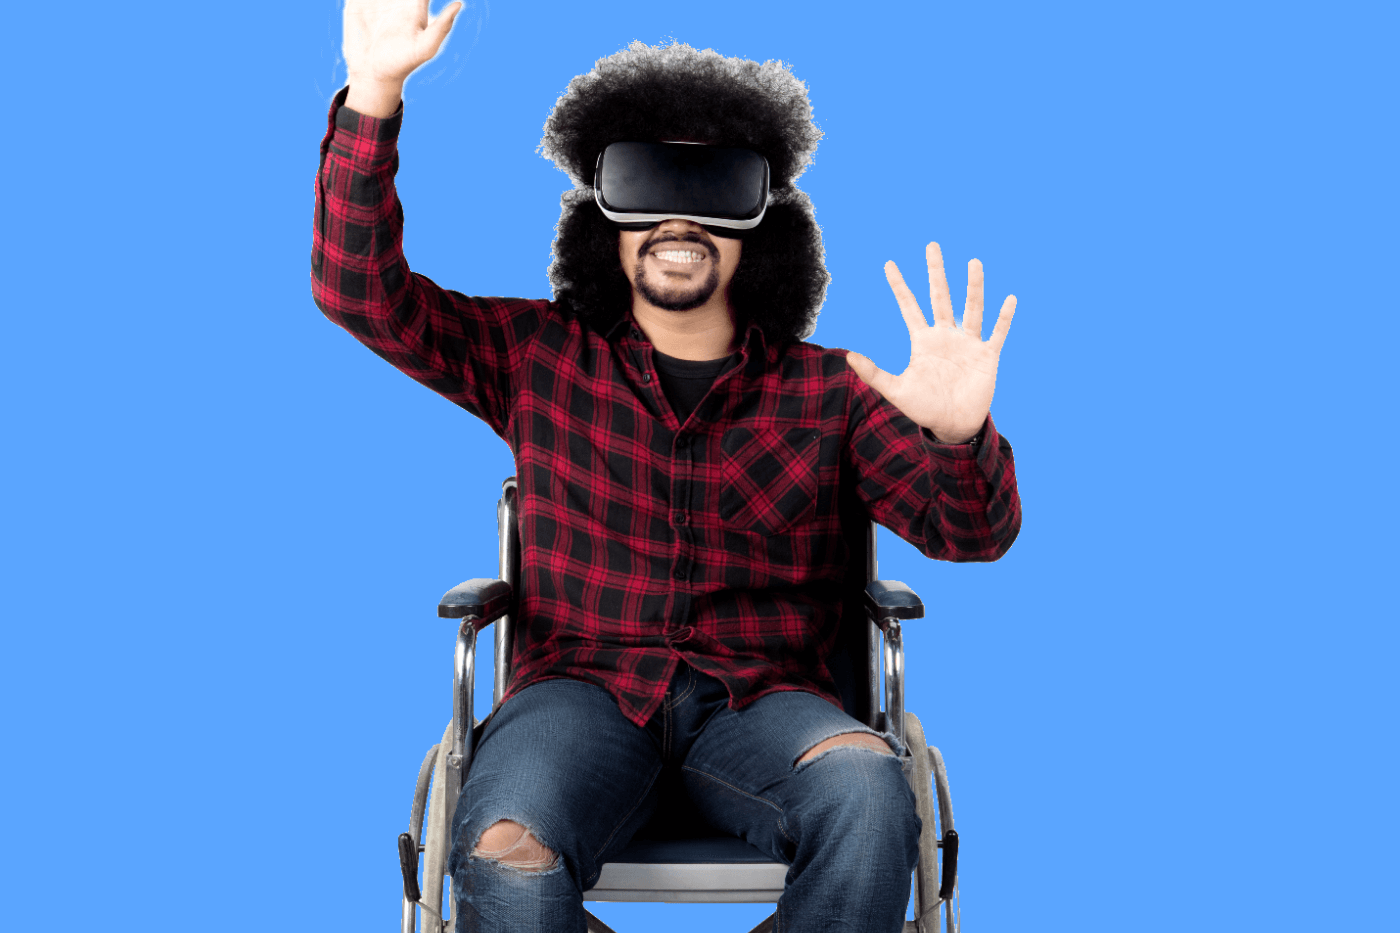 Benefits of AR and VR for People With Disability